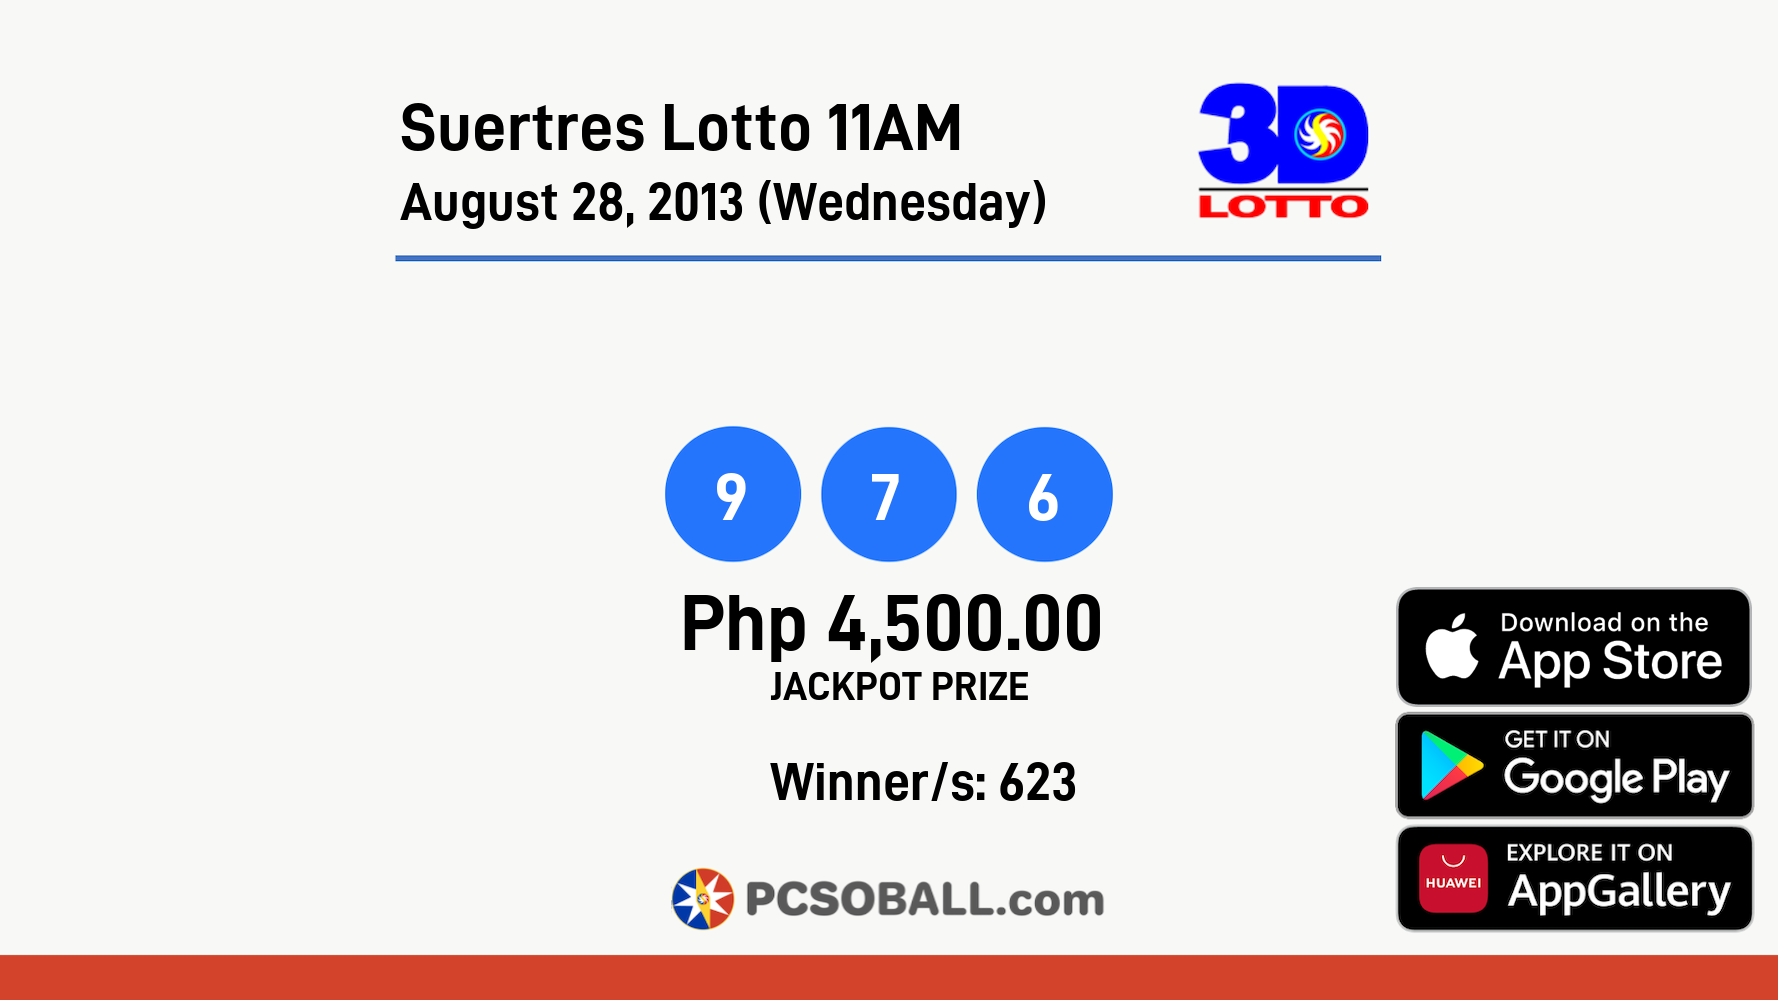 Suertres Lotto 11AM August 28, 2013 (Wednesday) Result